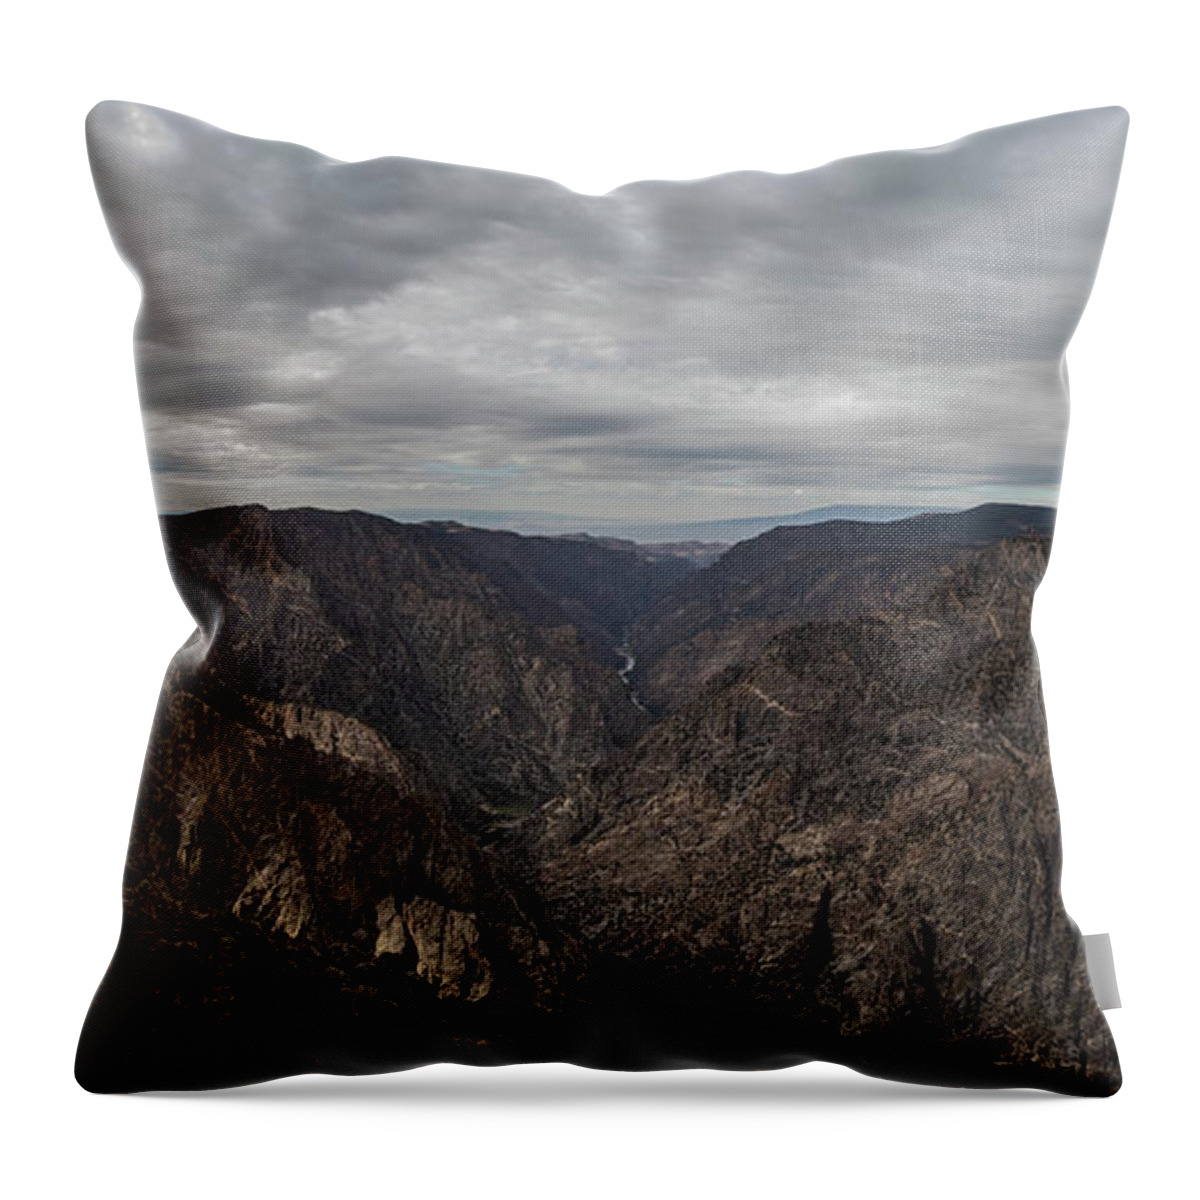 Black Canyon The Gunnison National Park Throw Pillow featuring the photograph Black Canyon the Gunnison National Park by John McGraw